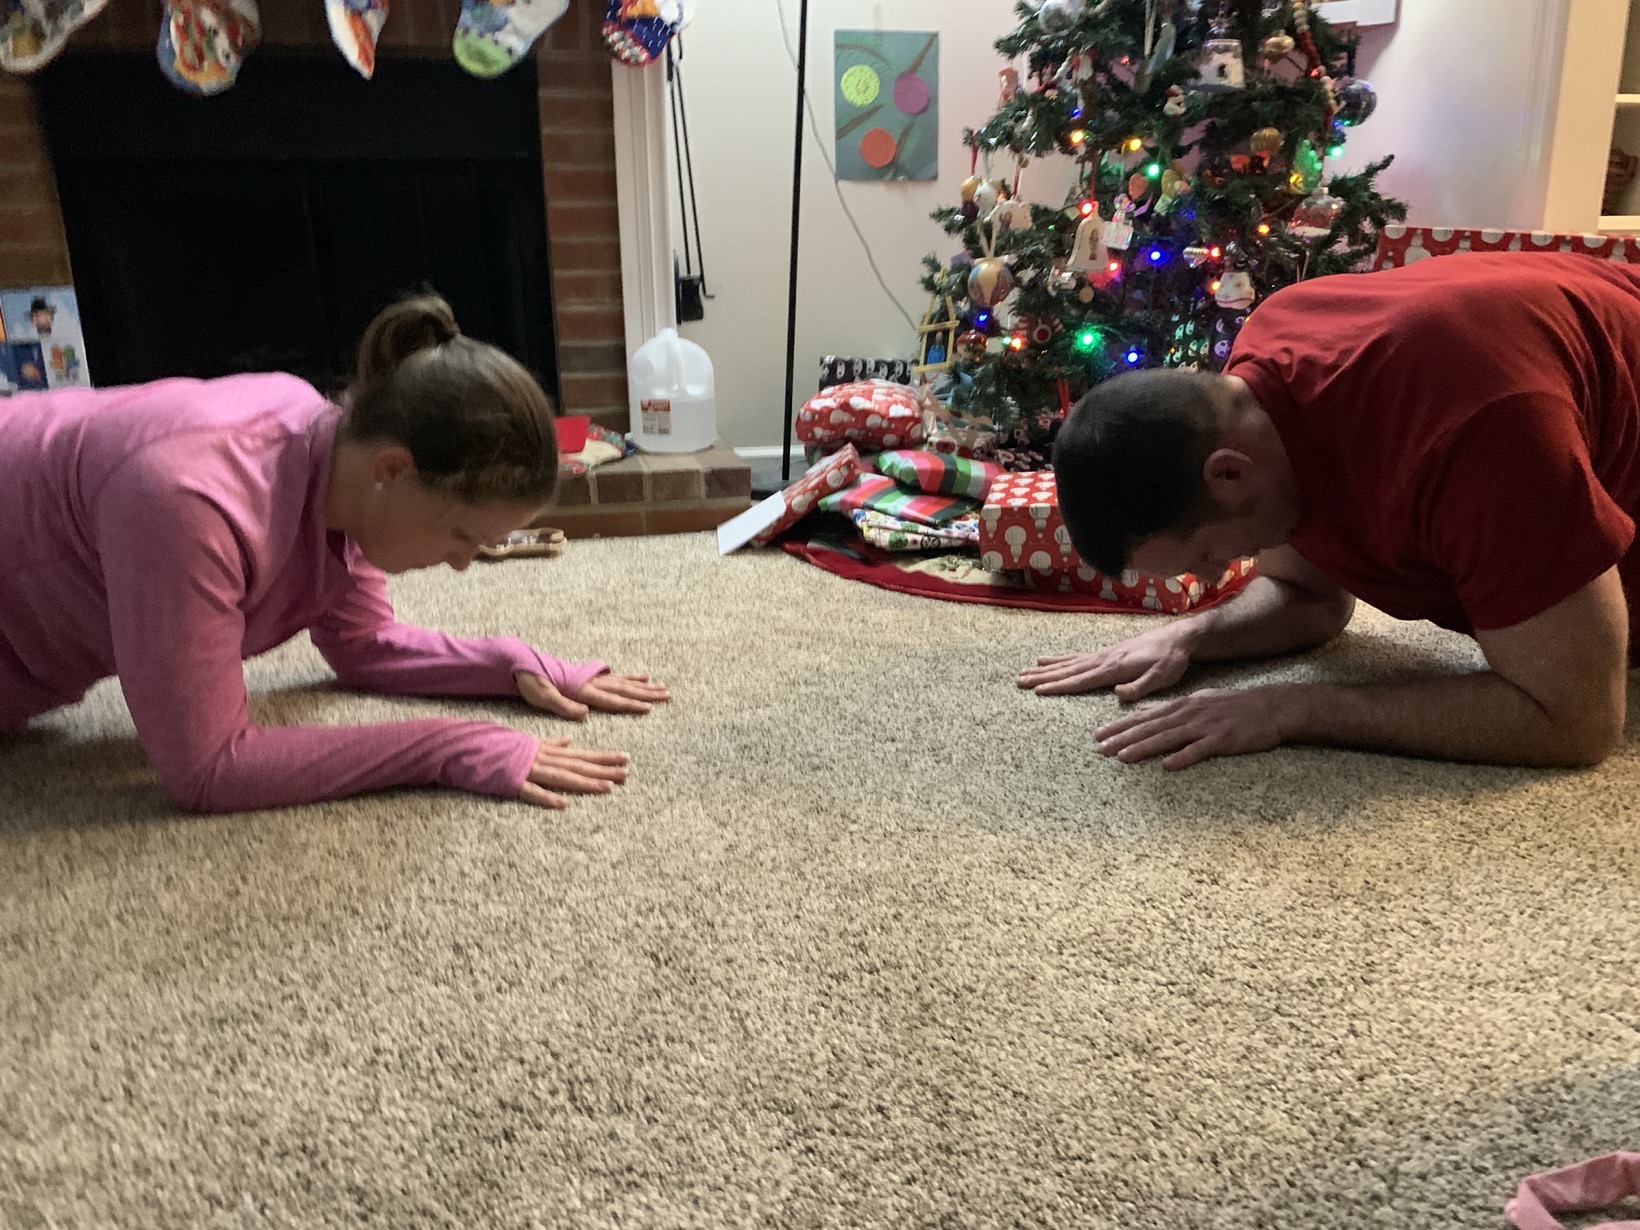 30 day plank challenge by the tree